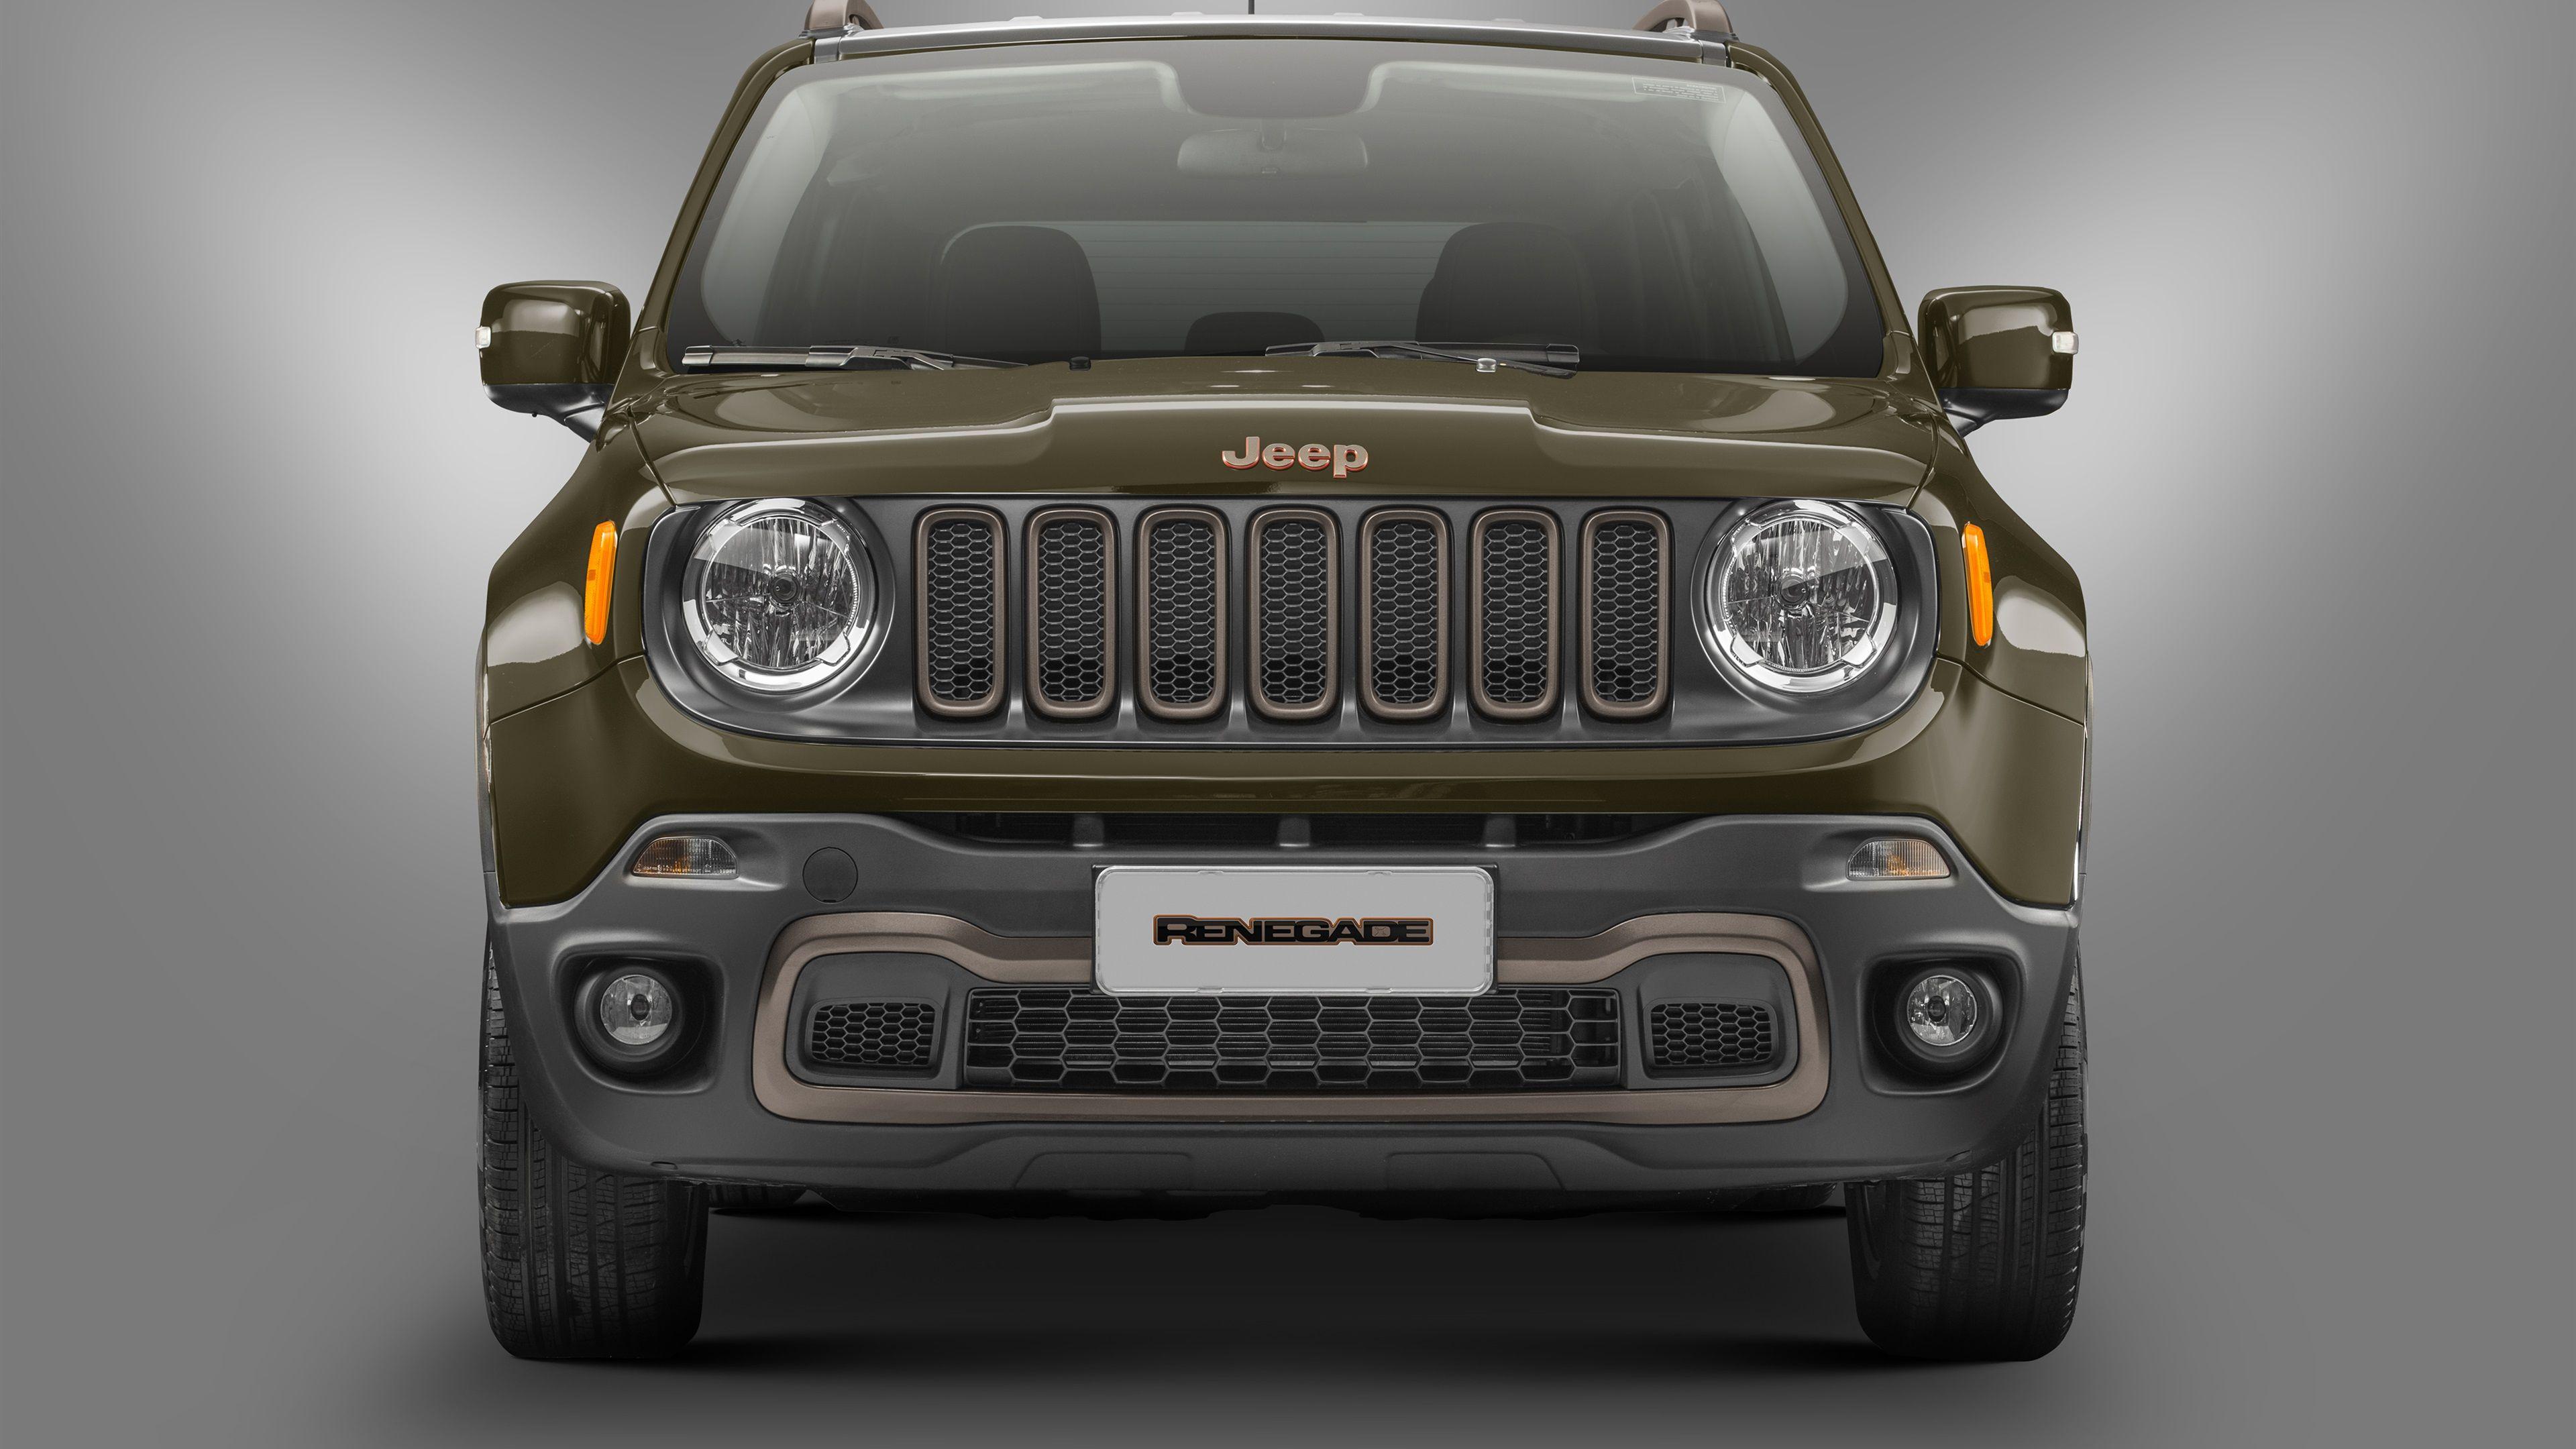 Wallpaper Jeep Renegade 75th Anniversary car front view 3840x2160